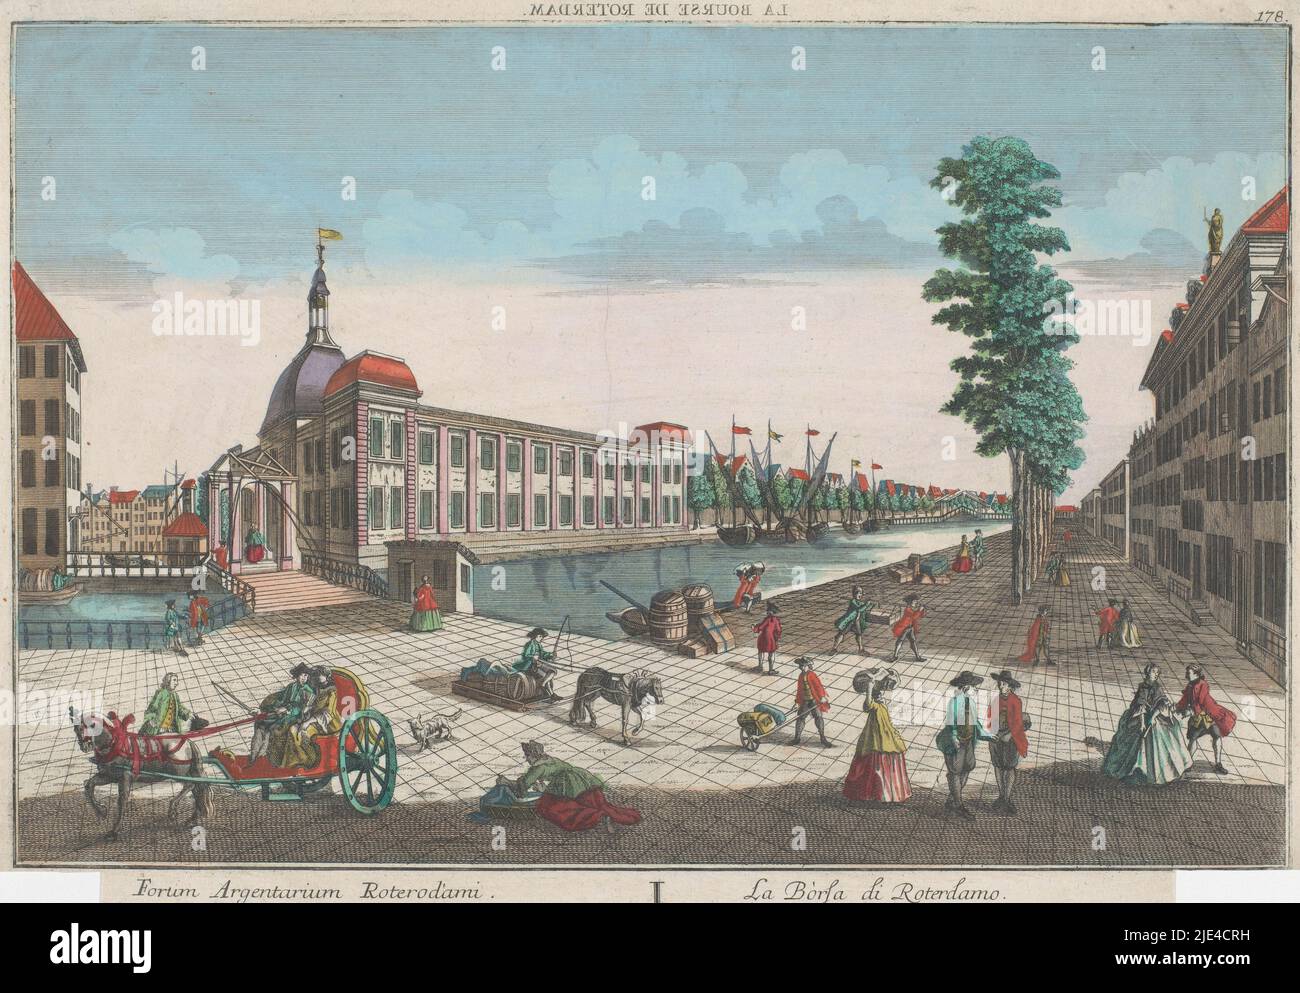 View of the Stock Exchange in Rotterdam, Georg Balthasar Probst, 1742 - 1801, On the left the Gapers bridge over the Blaak. Numbered top right: 178; numbered bottom left: 46., publisher: Georg Balthasar Probst, (mentioned on object), print maker: anonymous, publisher: Augsburg, print maker: Germany, 1742 - 1801, paper, etching, brush, h 314 mm × w 428 mm Stock Photo